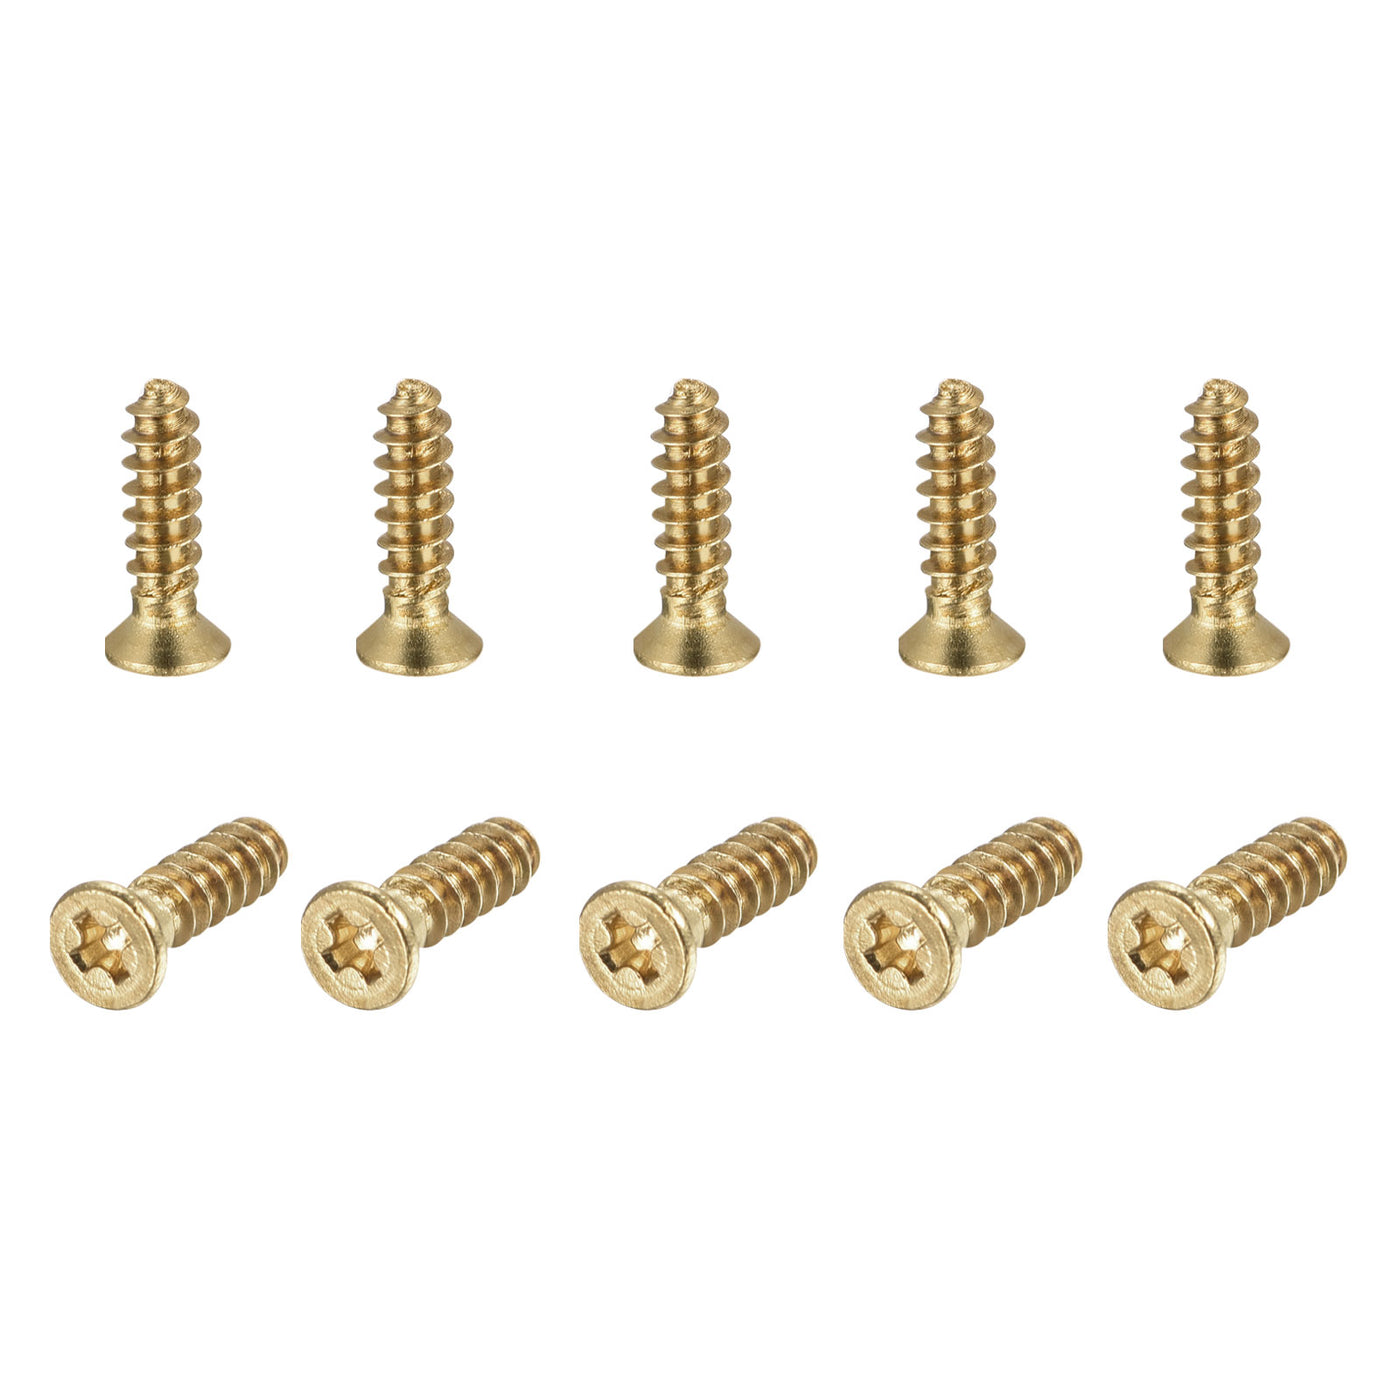 uxcell Uxcell Brass Wood Screws, M2.5x10mm Phillips Flat Head Self Tapping Connector for Door, Cabinet, Wooden Furniture 100Pcs